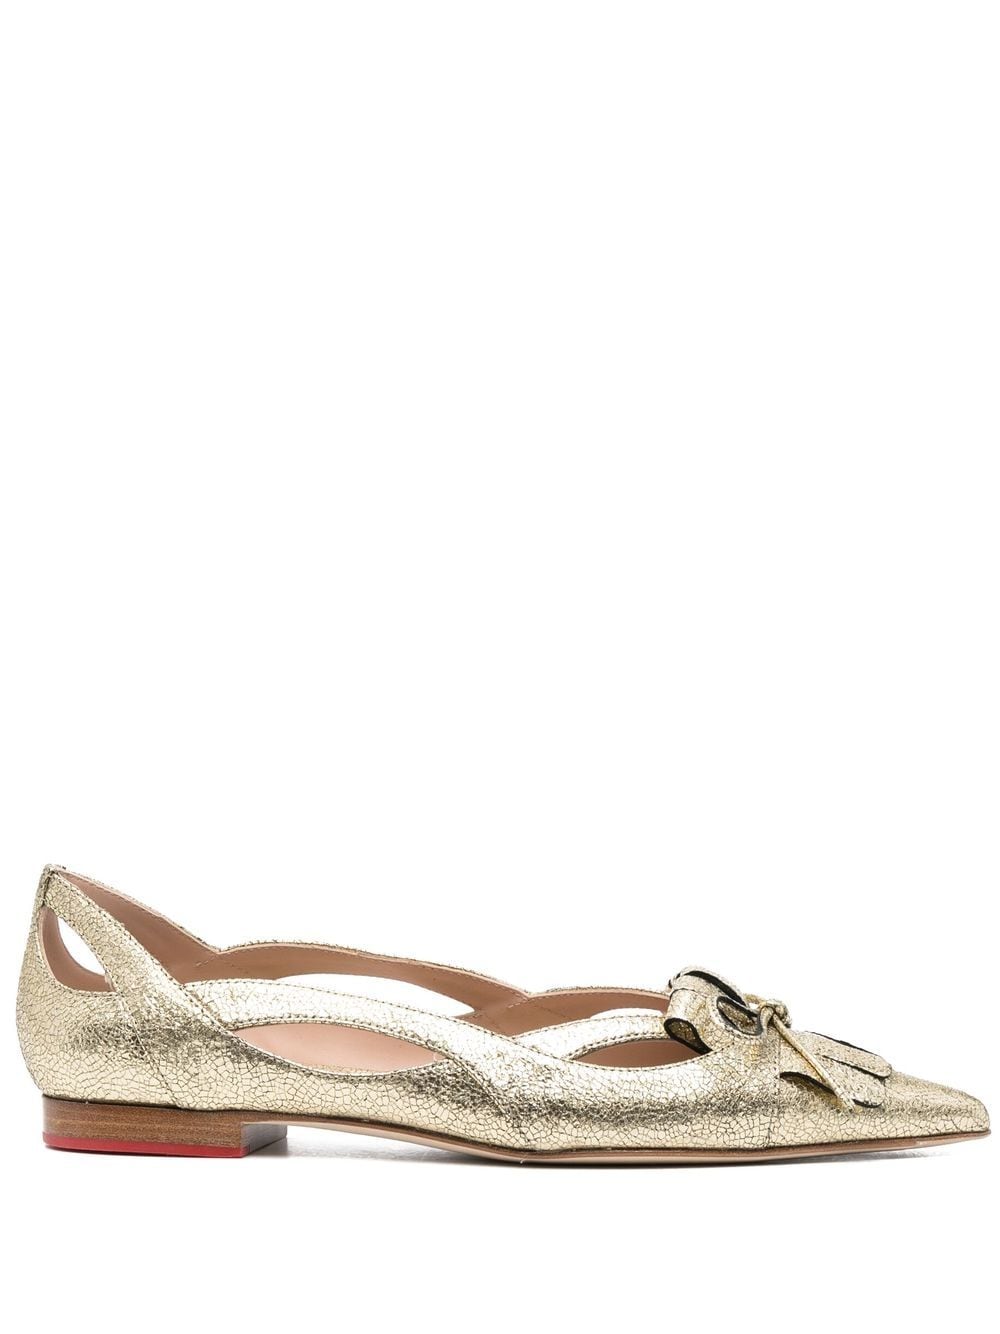 Scarosso pointed toe ballerina pumps - Gold